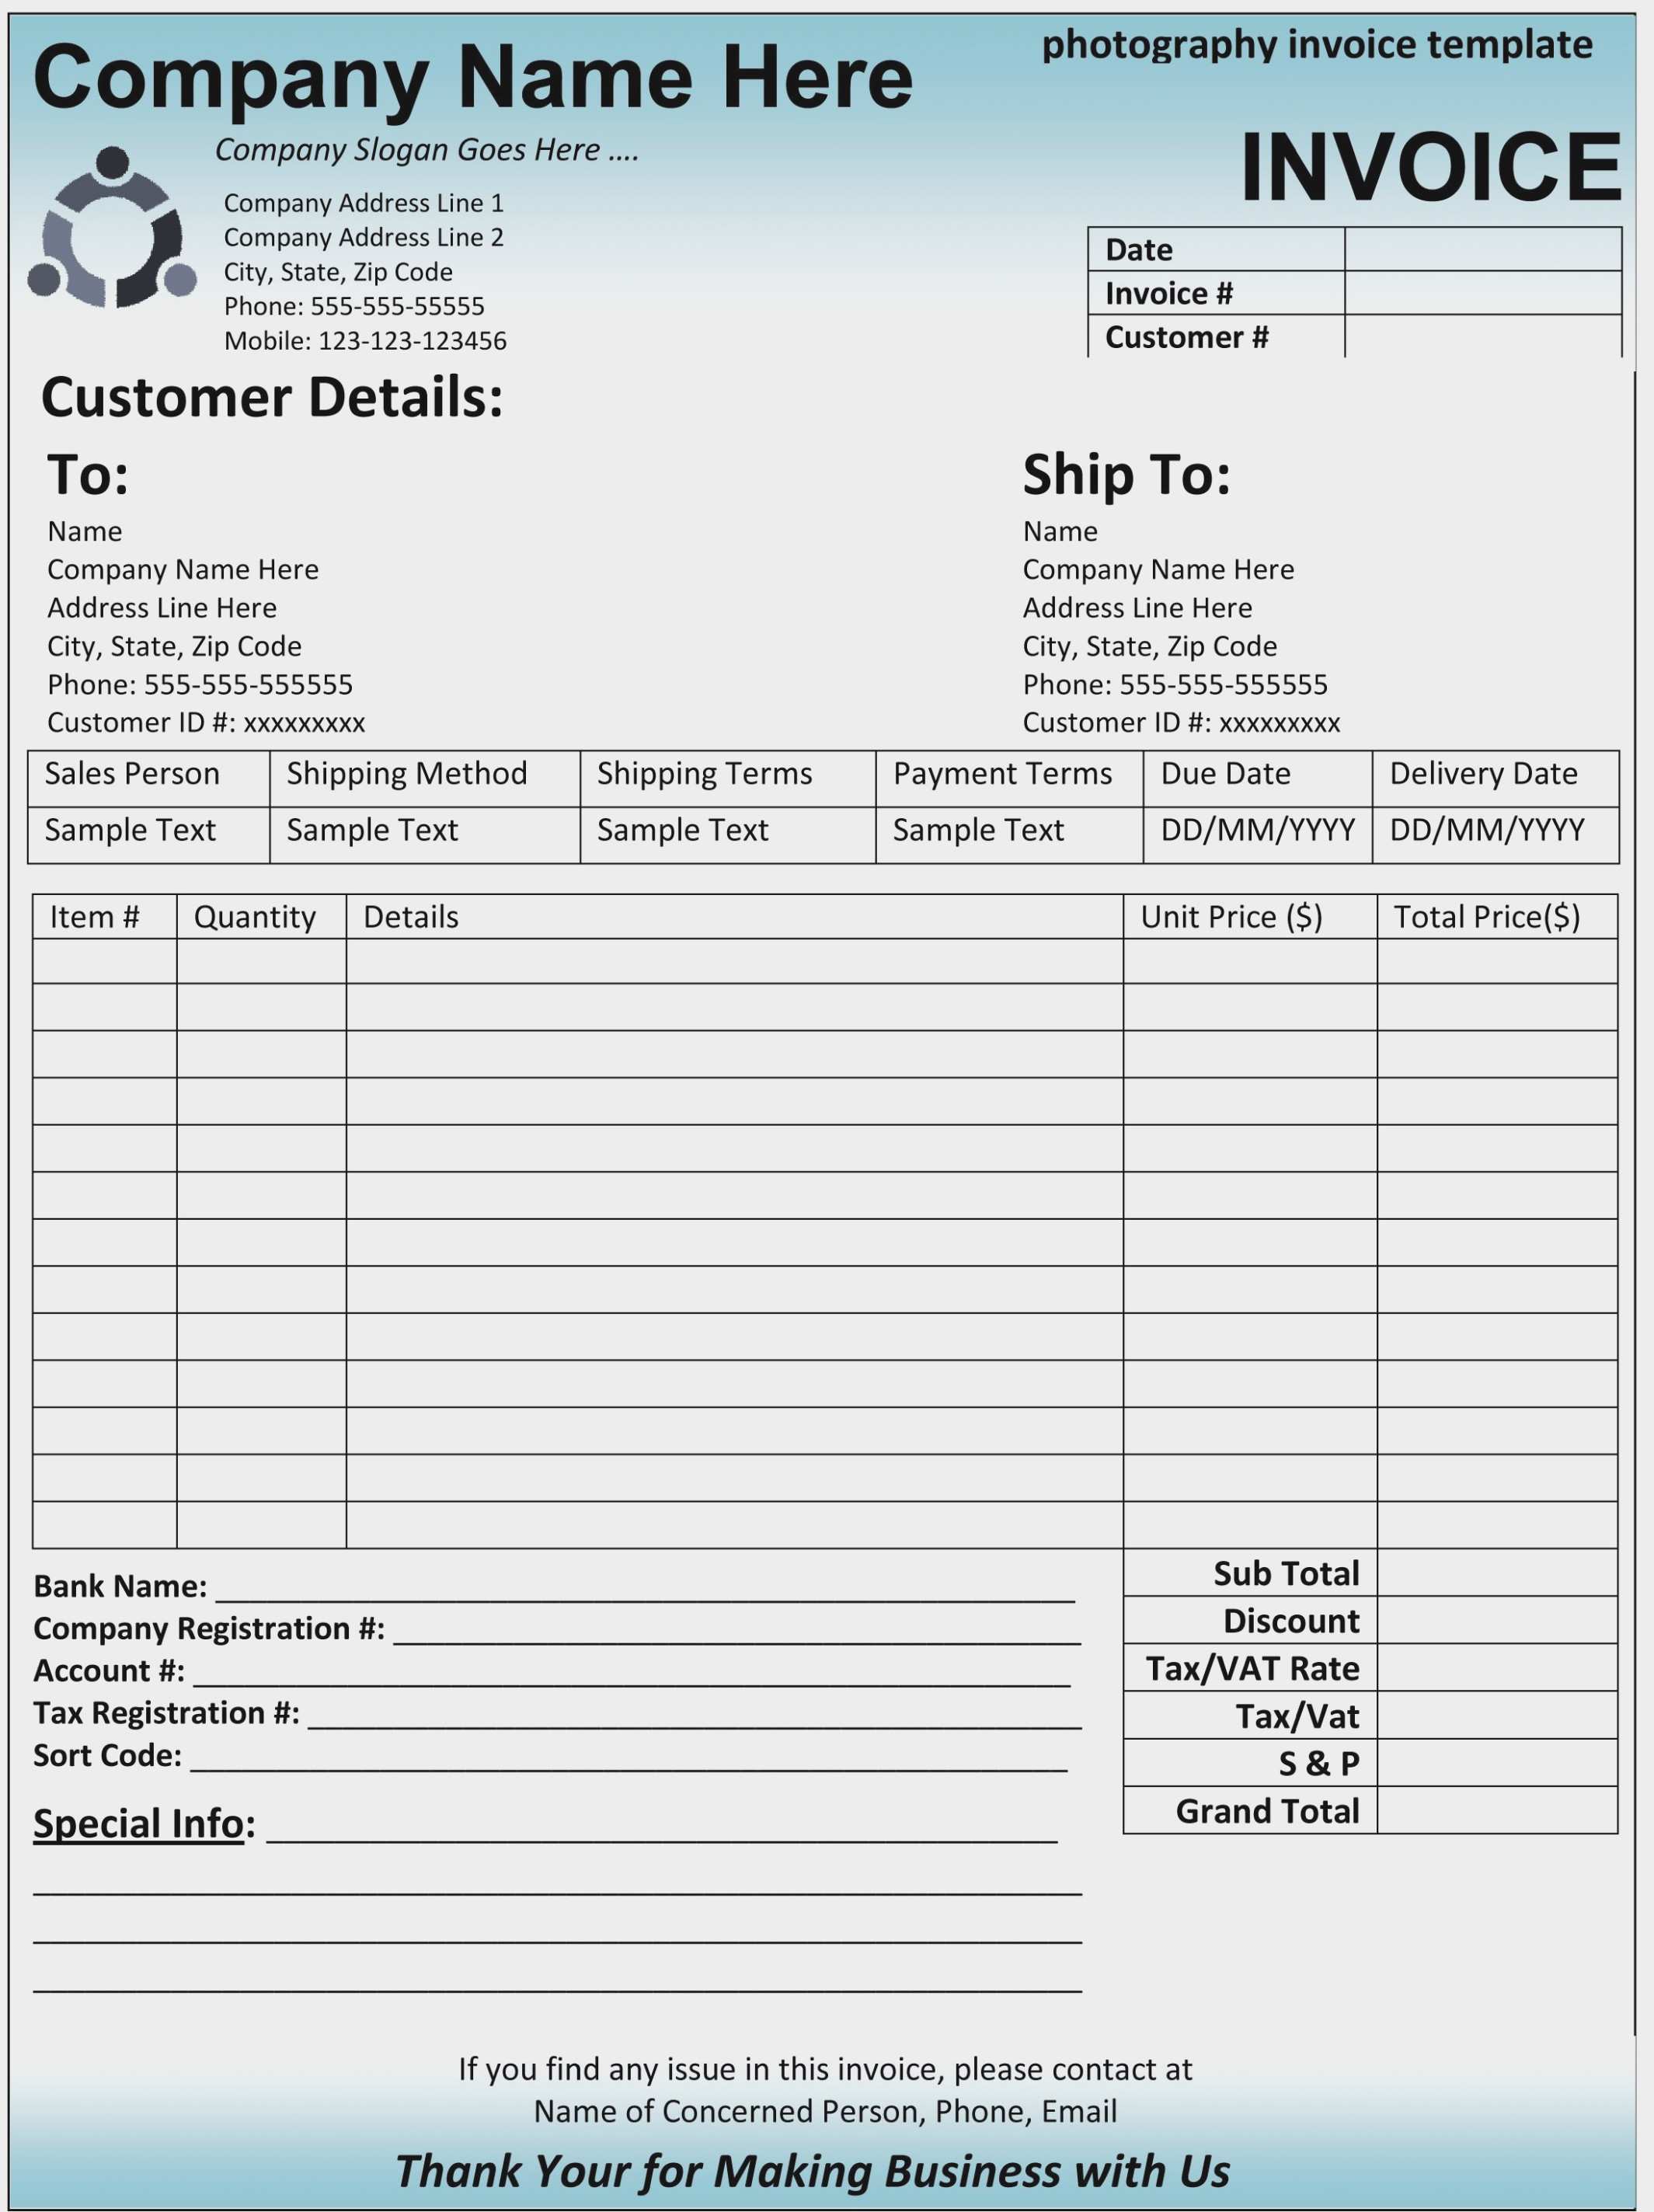 17-best-invoice-format-with-bank-details-photo-for-invoice-format-with